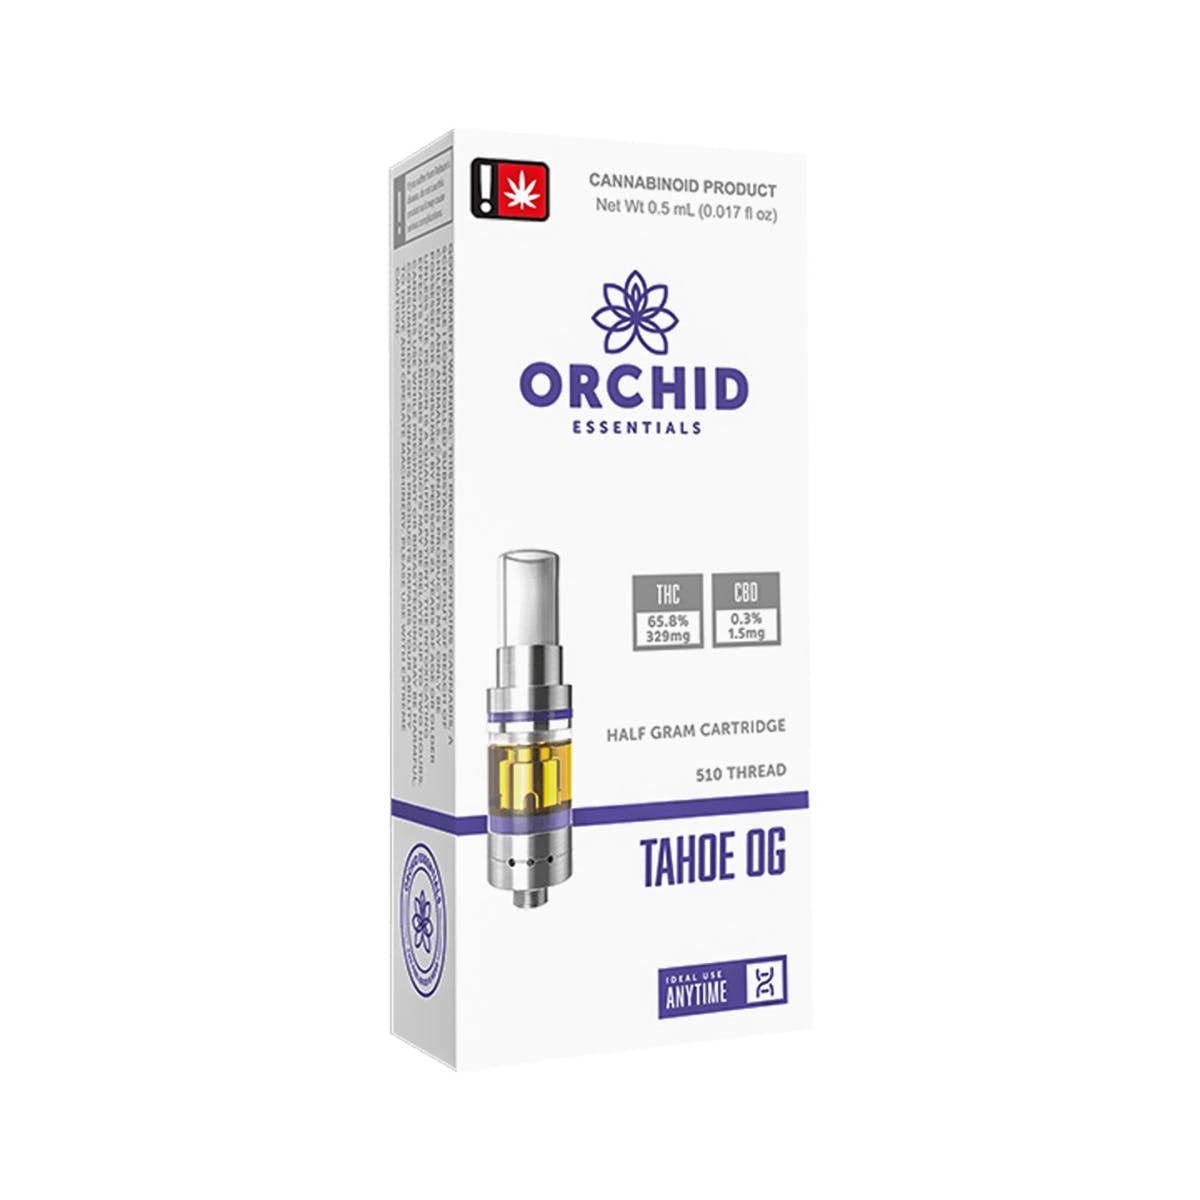 concentrate-orchid-essentials-tahoe-og-5g-refill-cartridge